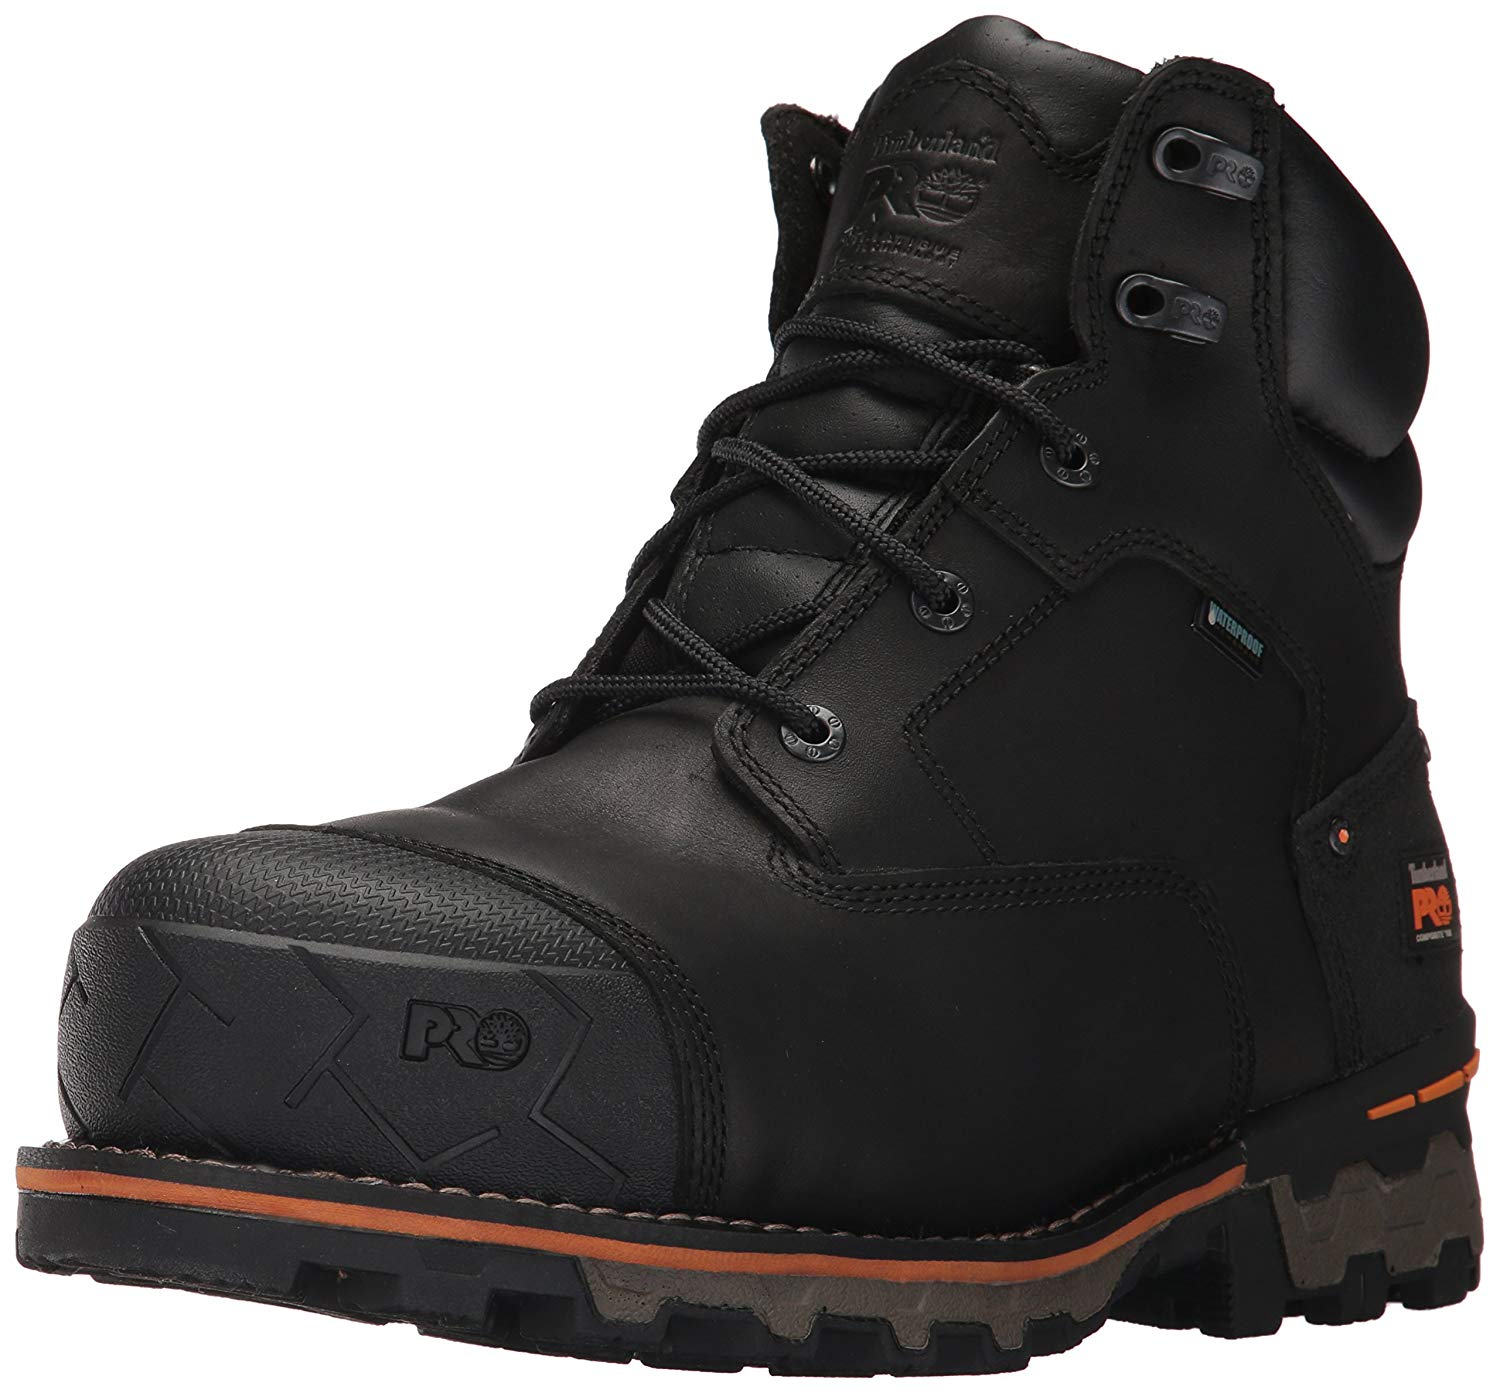 timberland pro boondock 8 inch composite toe boots